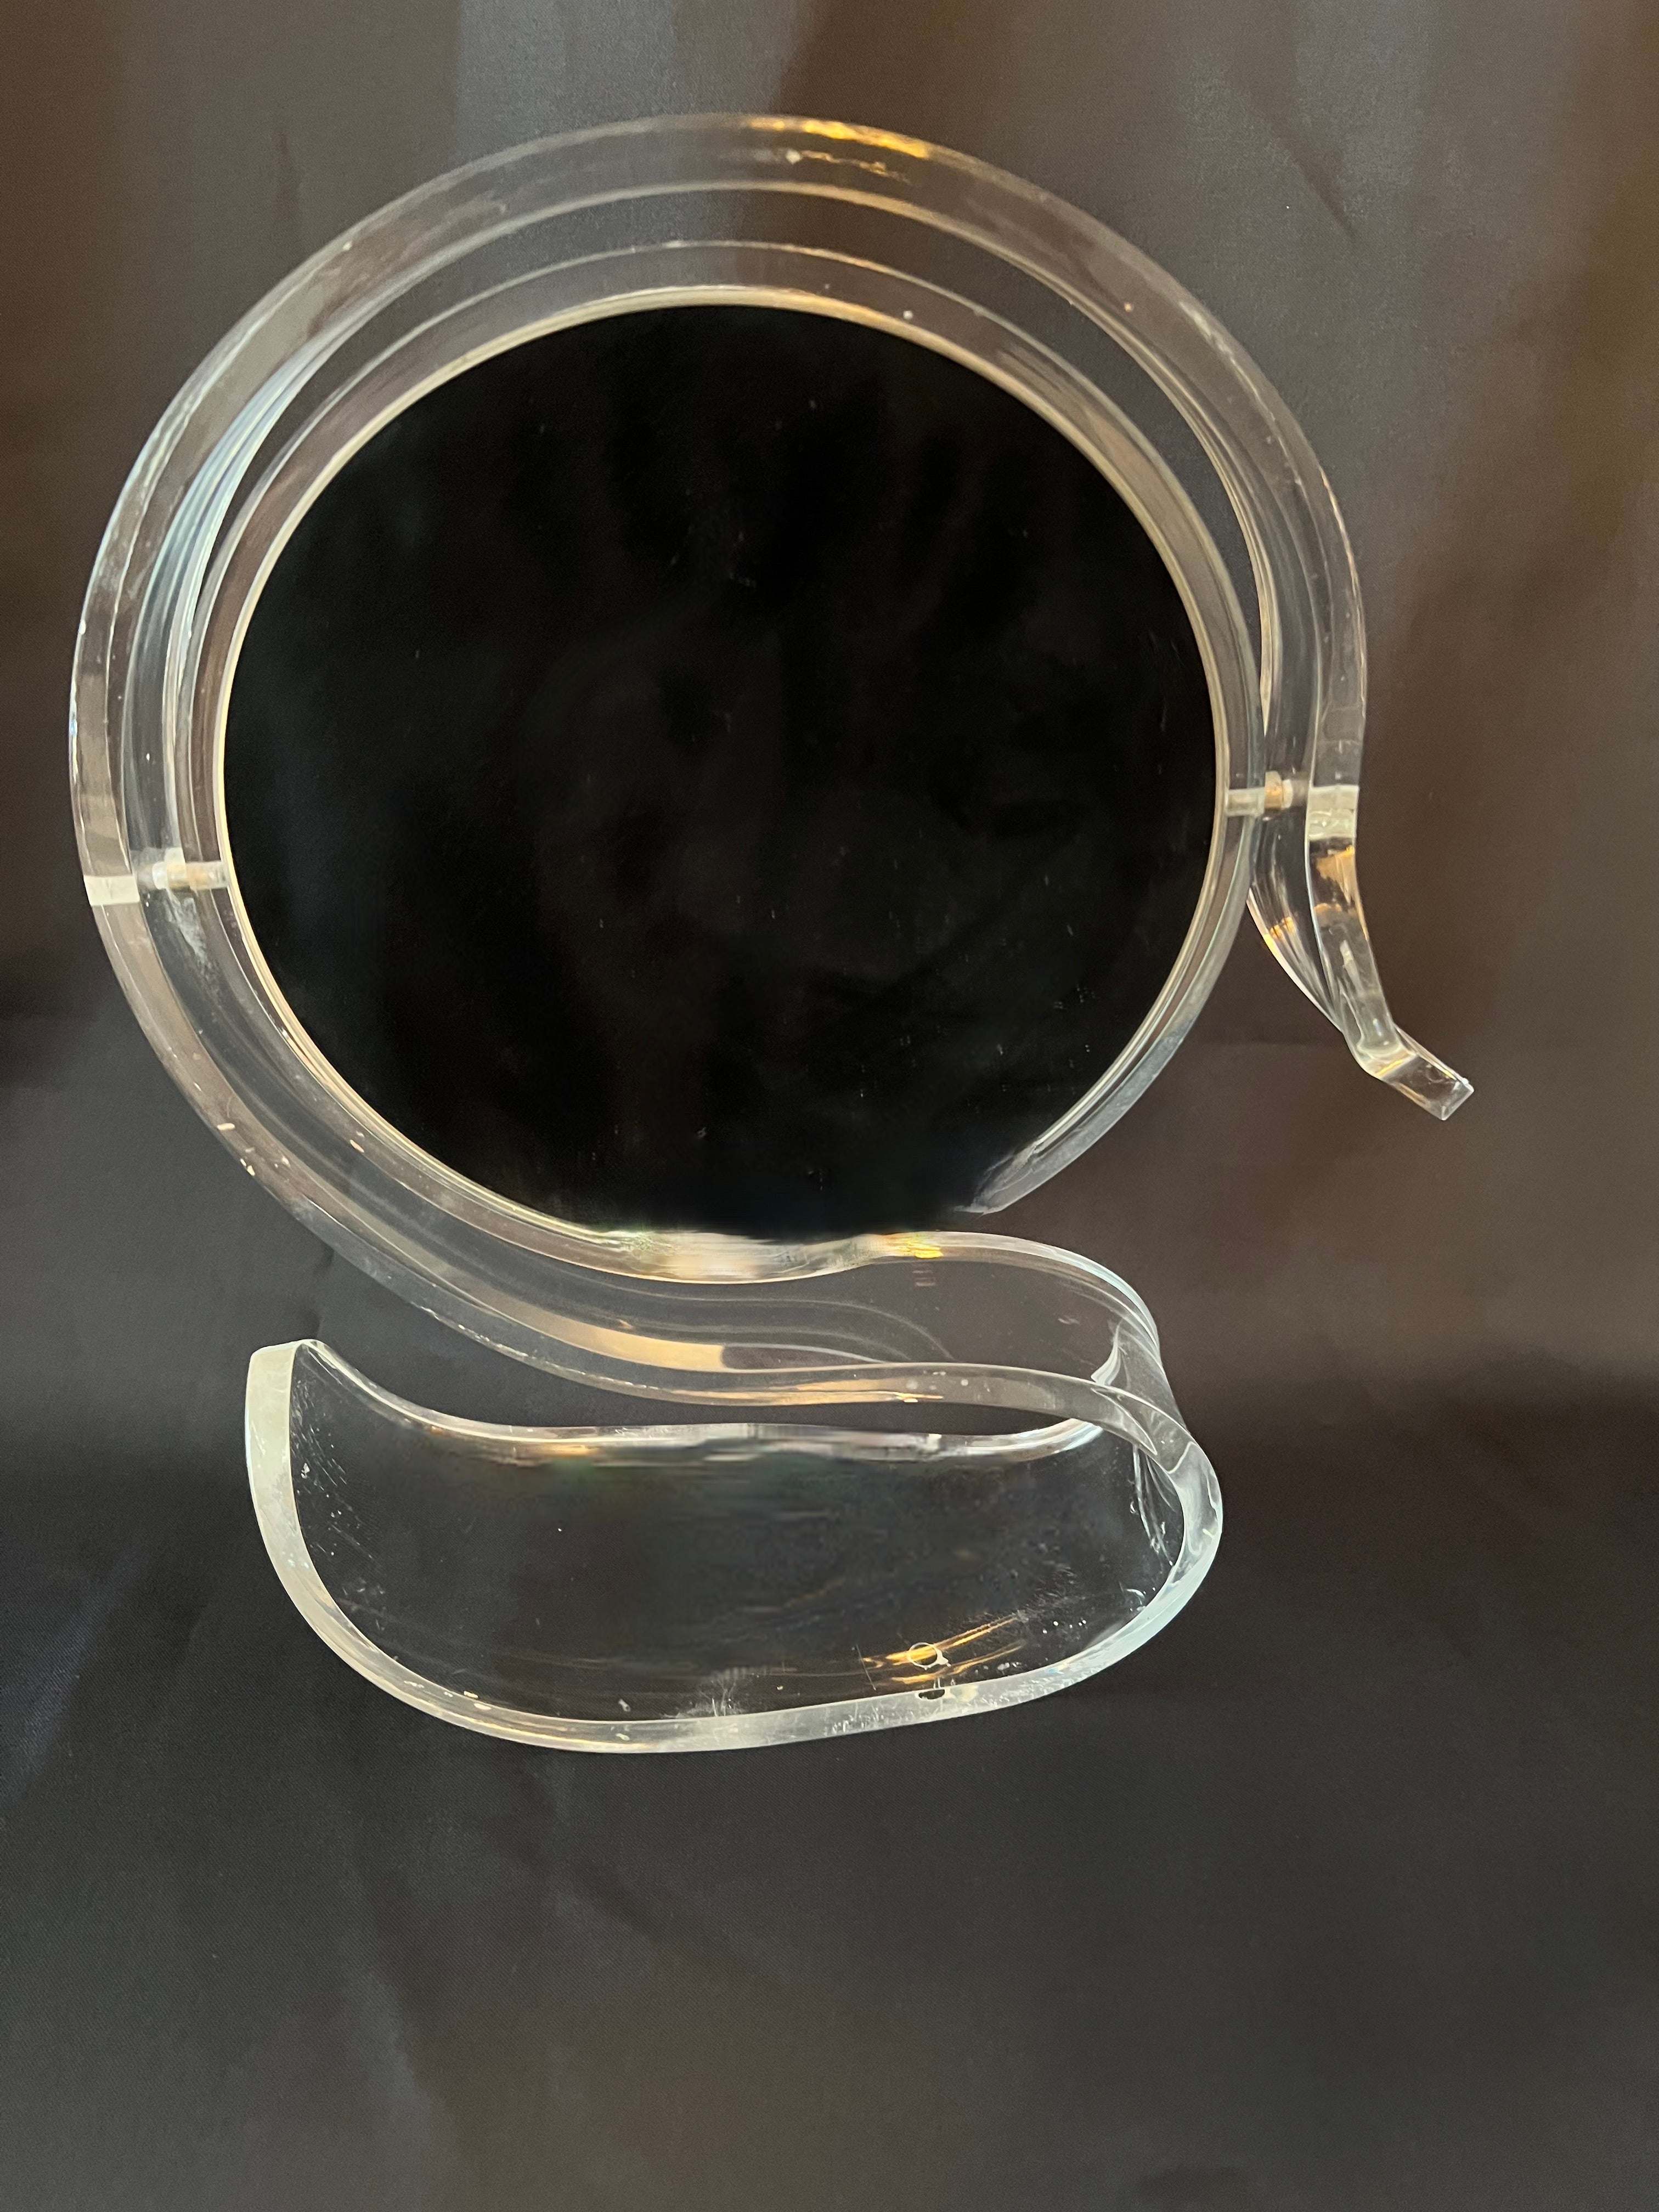 A lovely Acrylic or Plexiglass Mirror frame inspired by a swan... the frame is polished and the mirror is double sided and flips from regular to Magnification.  For those times when you need to see closer than normal for that perfect cat eyed lid -